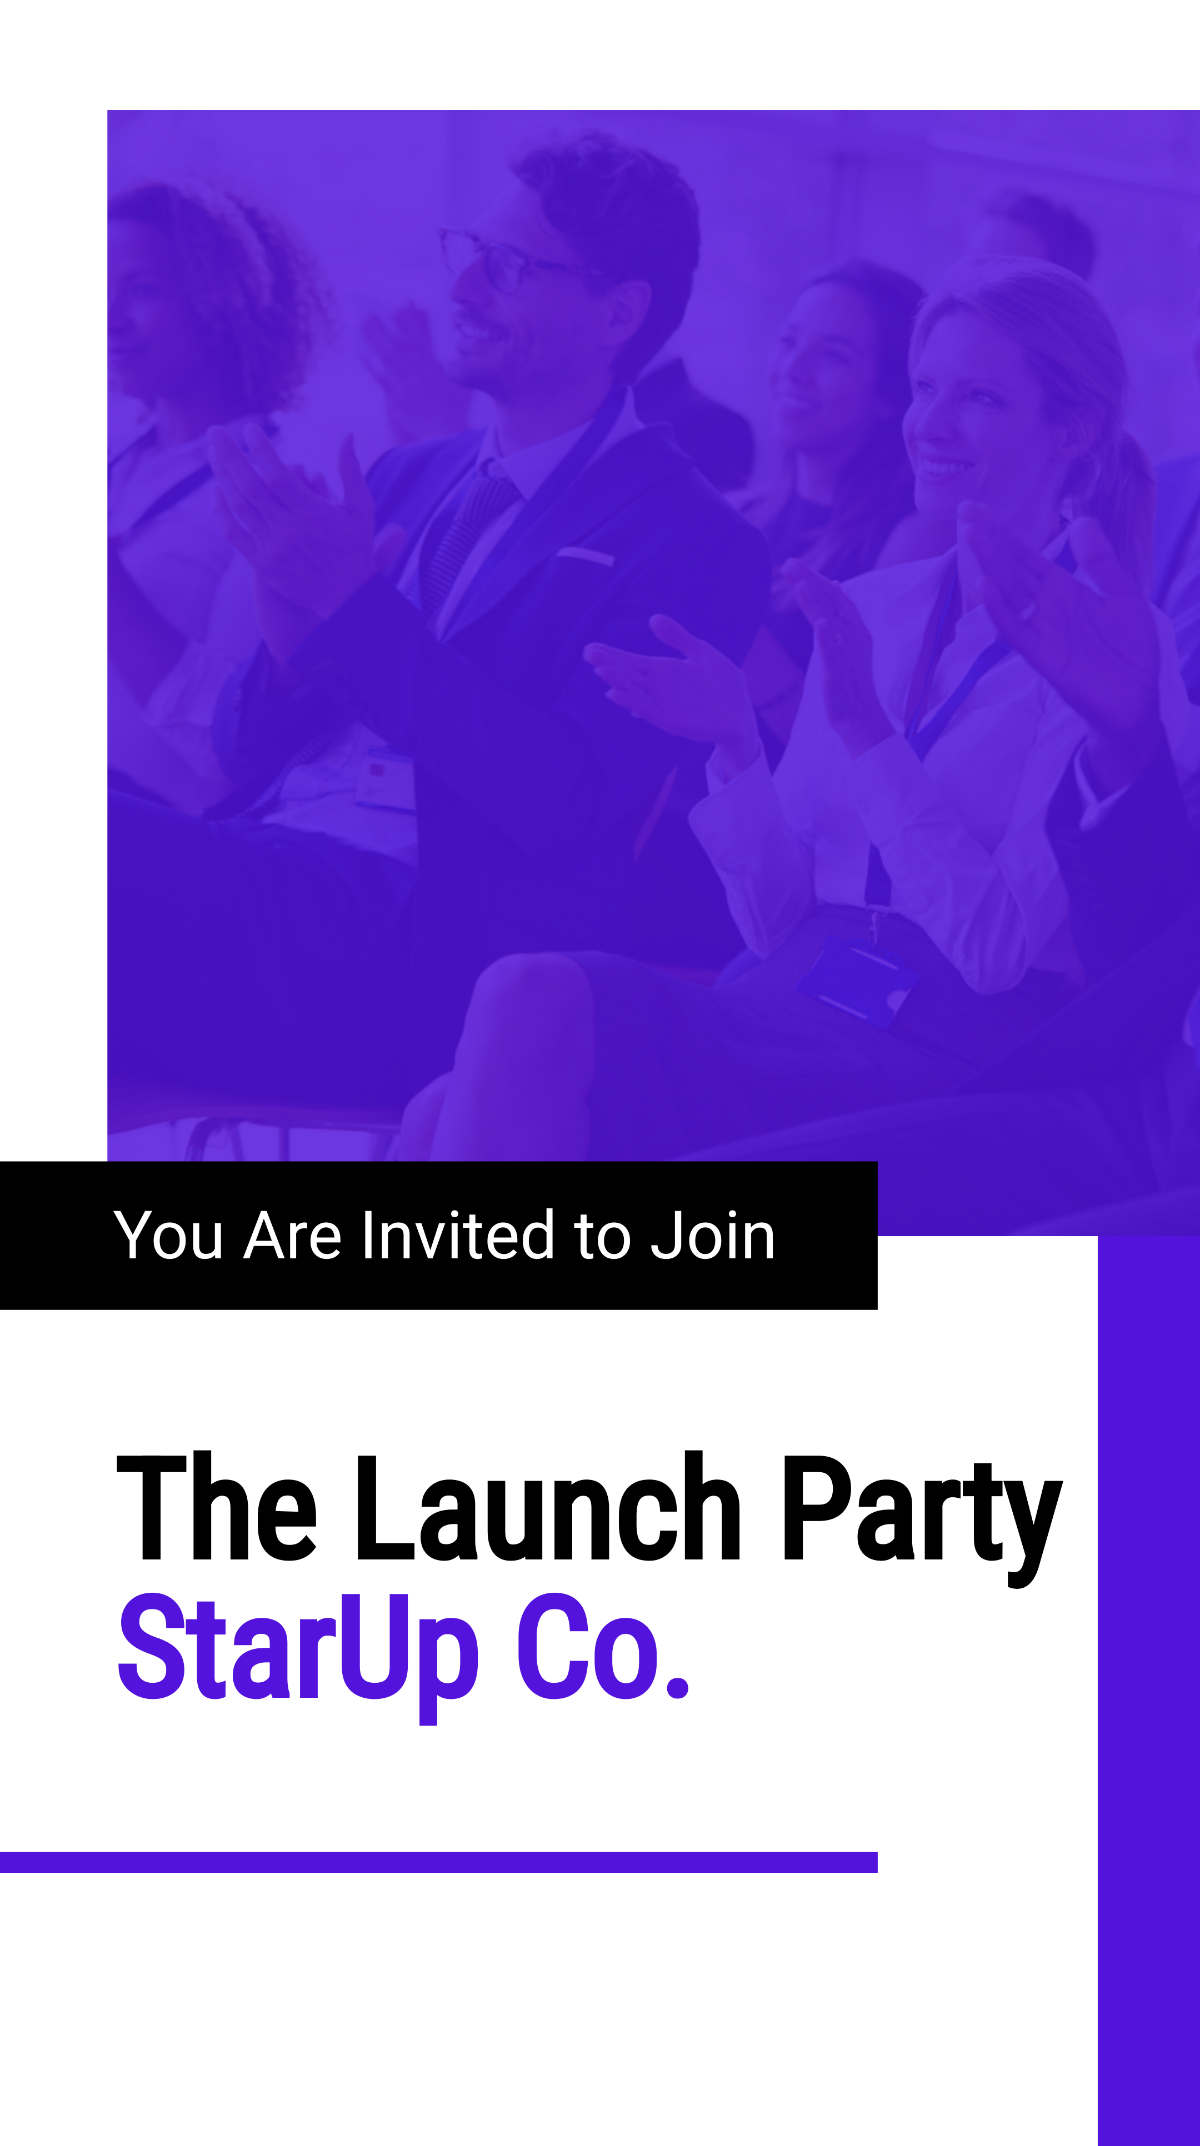 Free Startup Launch Party Instagram Story Template